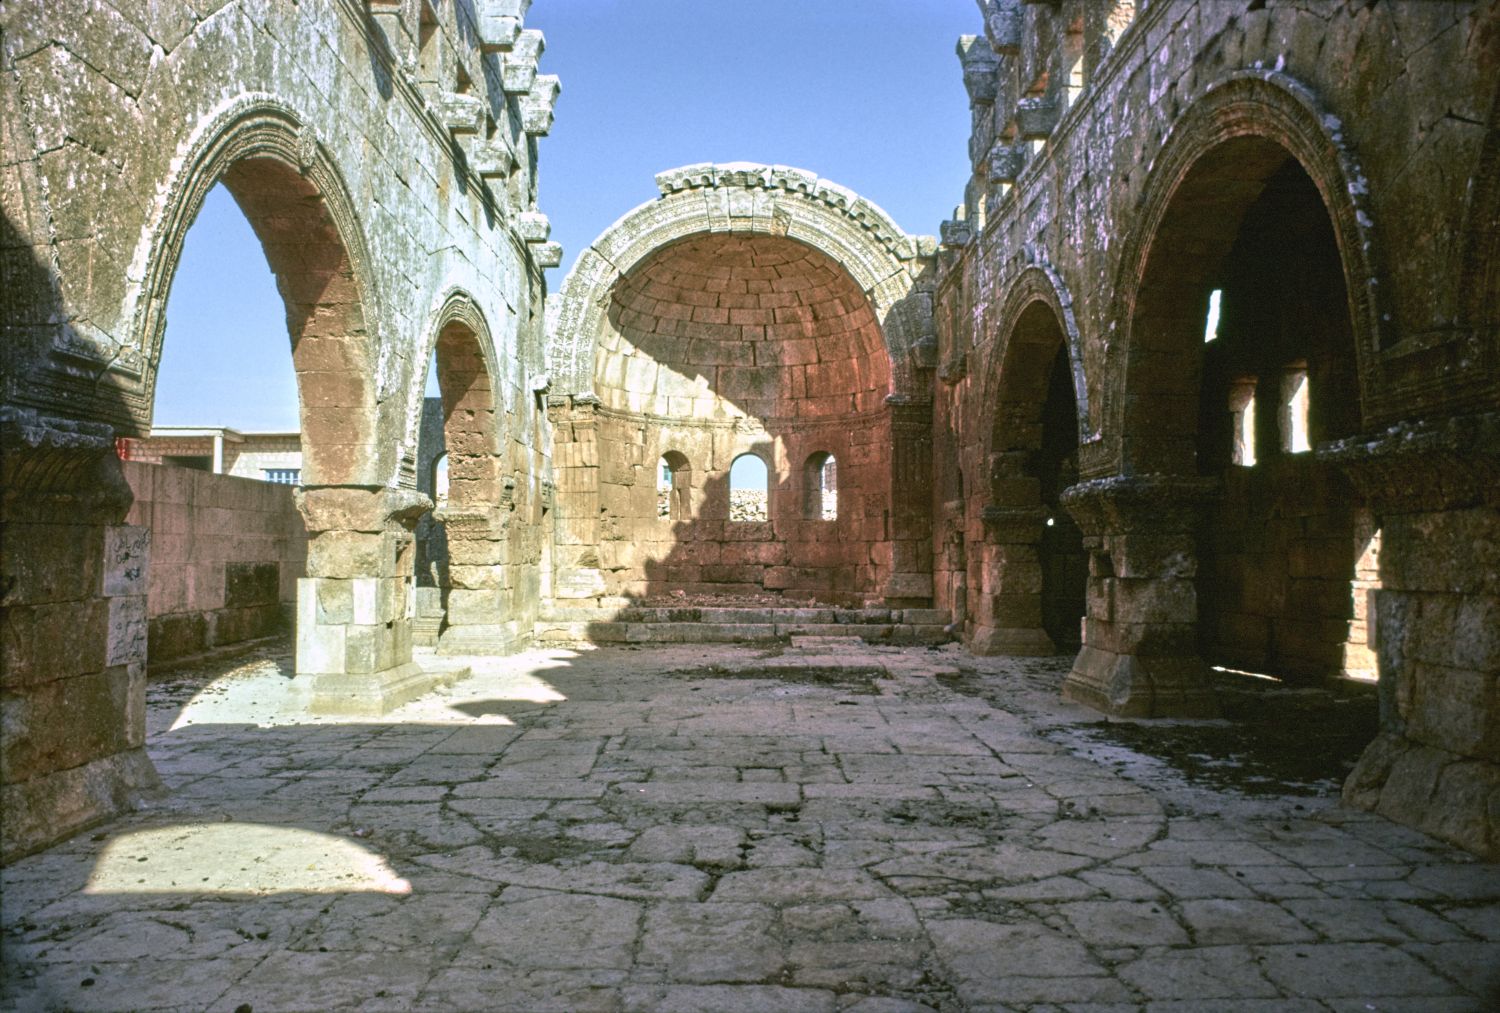 View of nave facing east toward apse.